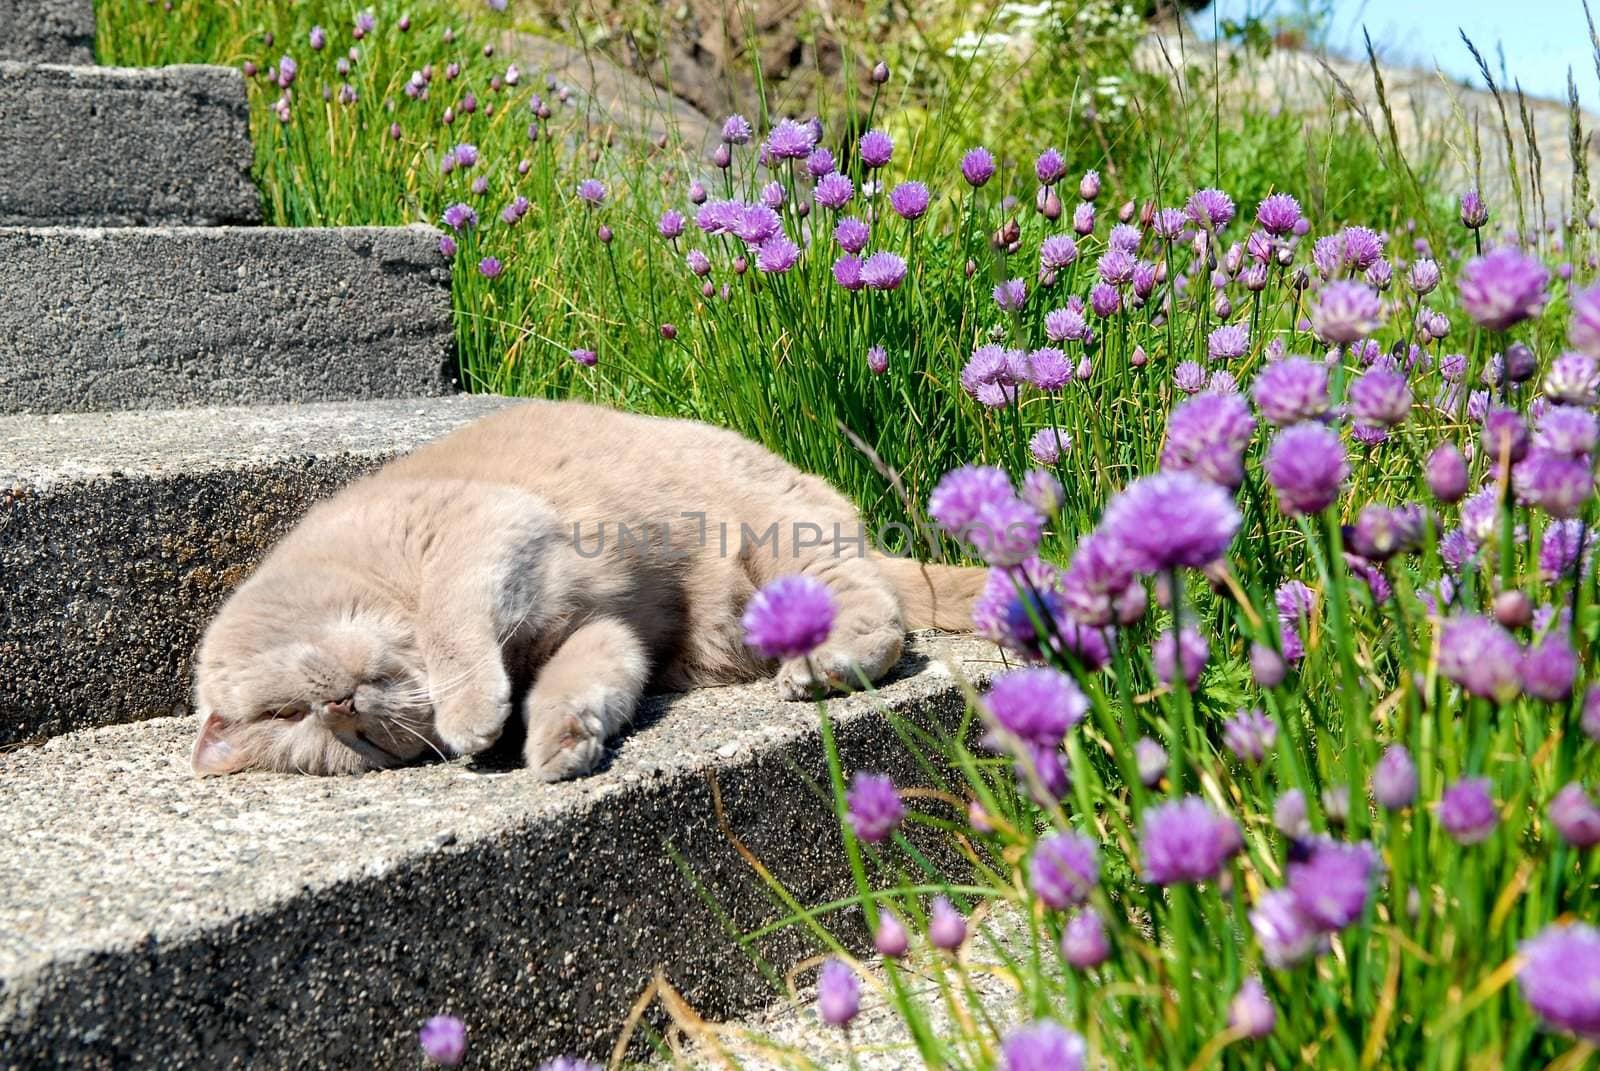 cat sleeping by the side of wild flowers. Please note: No negative use allowed.